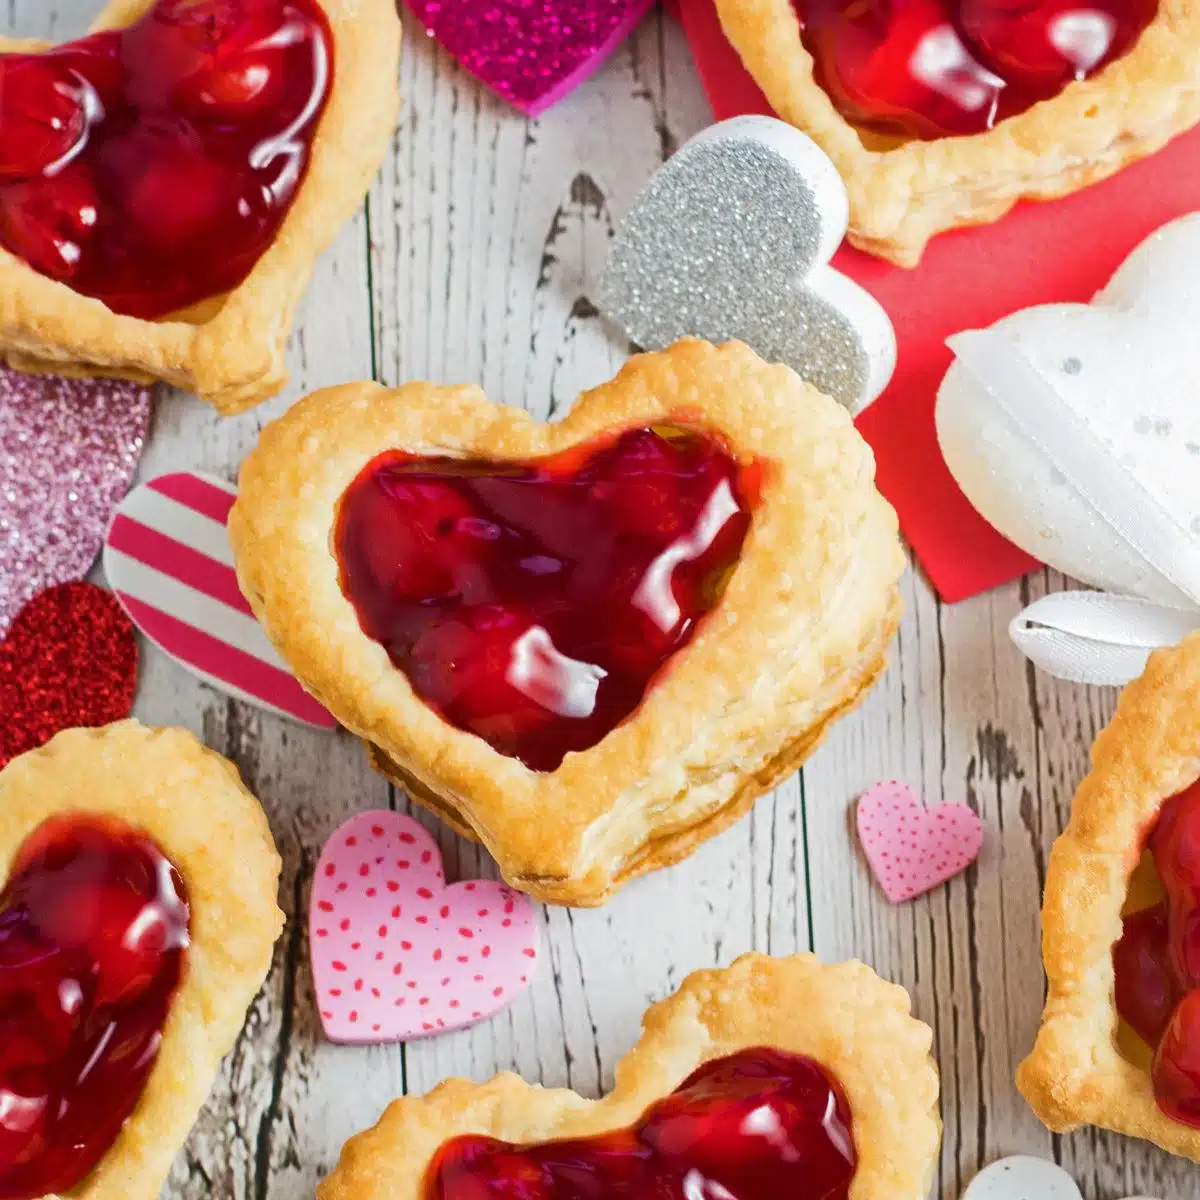 Best heart shaped dessert ideas for Valentine's day in a wonderfully creative collection to impress your loved one like these tasty puff pastry hearts.